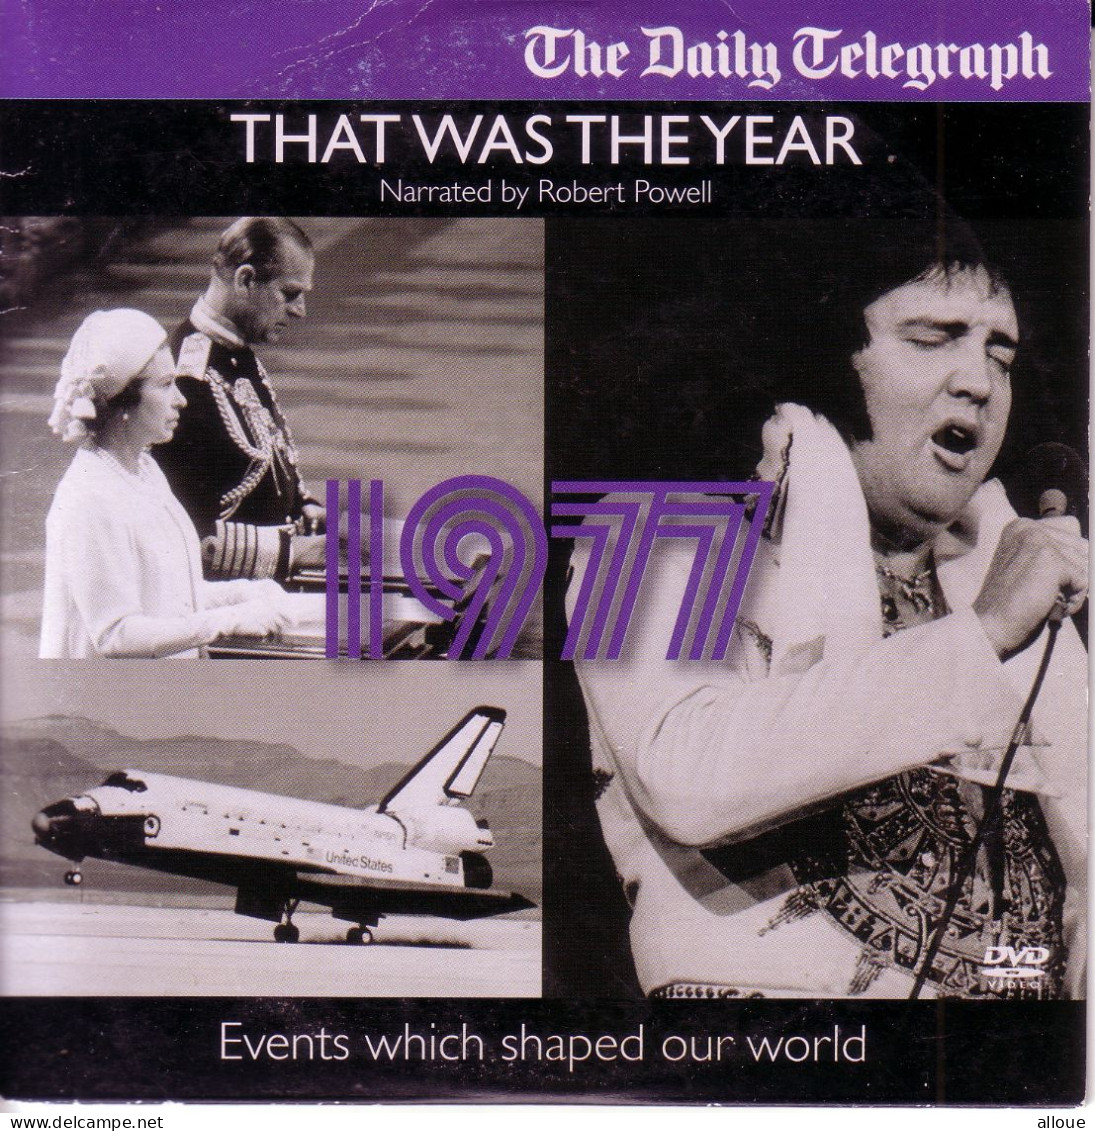 THAT WAS THE YEAR 1977 - CD DAILY TELEGRAPH - POCHETTE CARTON - THE QUEEN CELEBRATES HER SILVER JUBILEE - THE KING ELVIS - Musik-DVD's